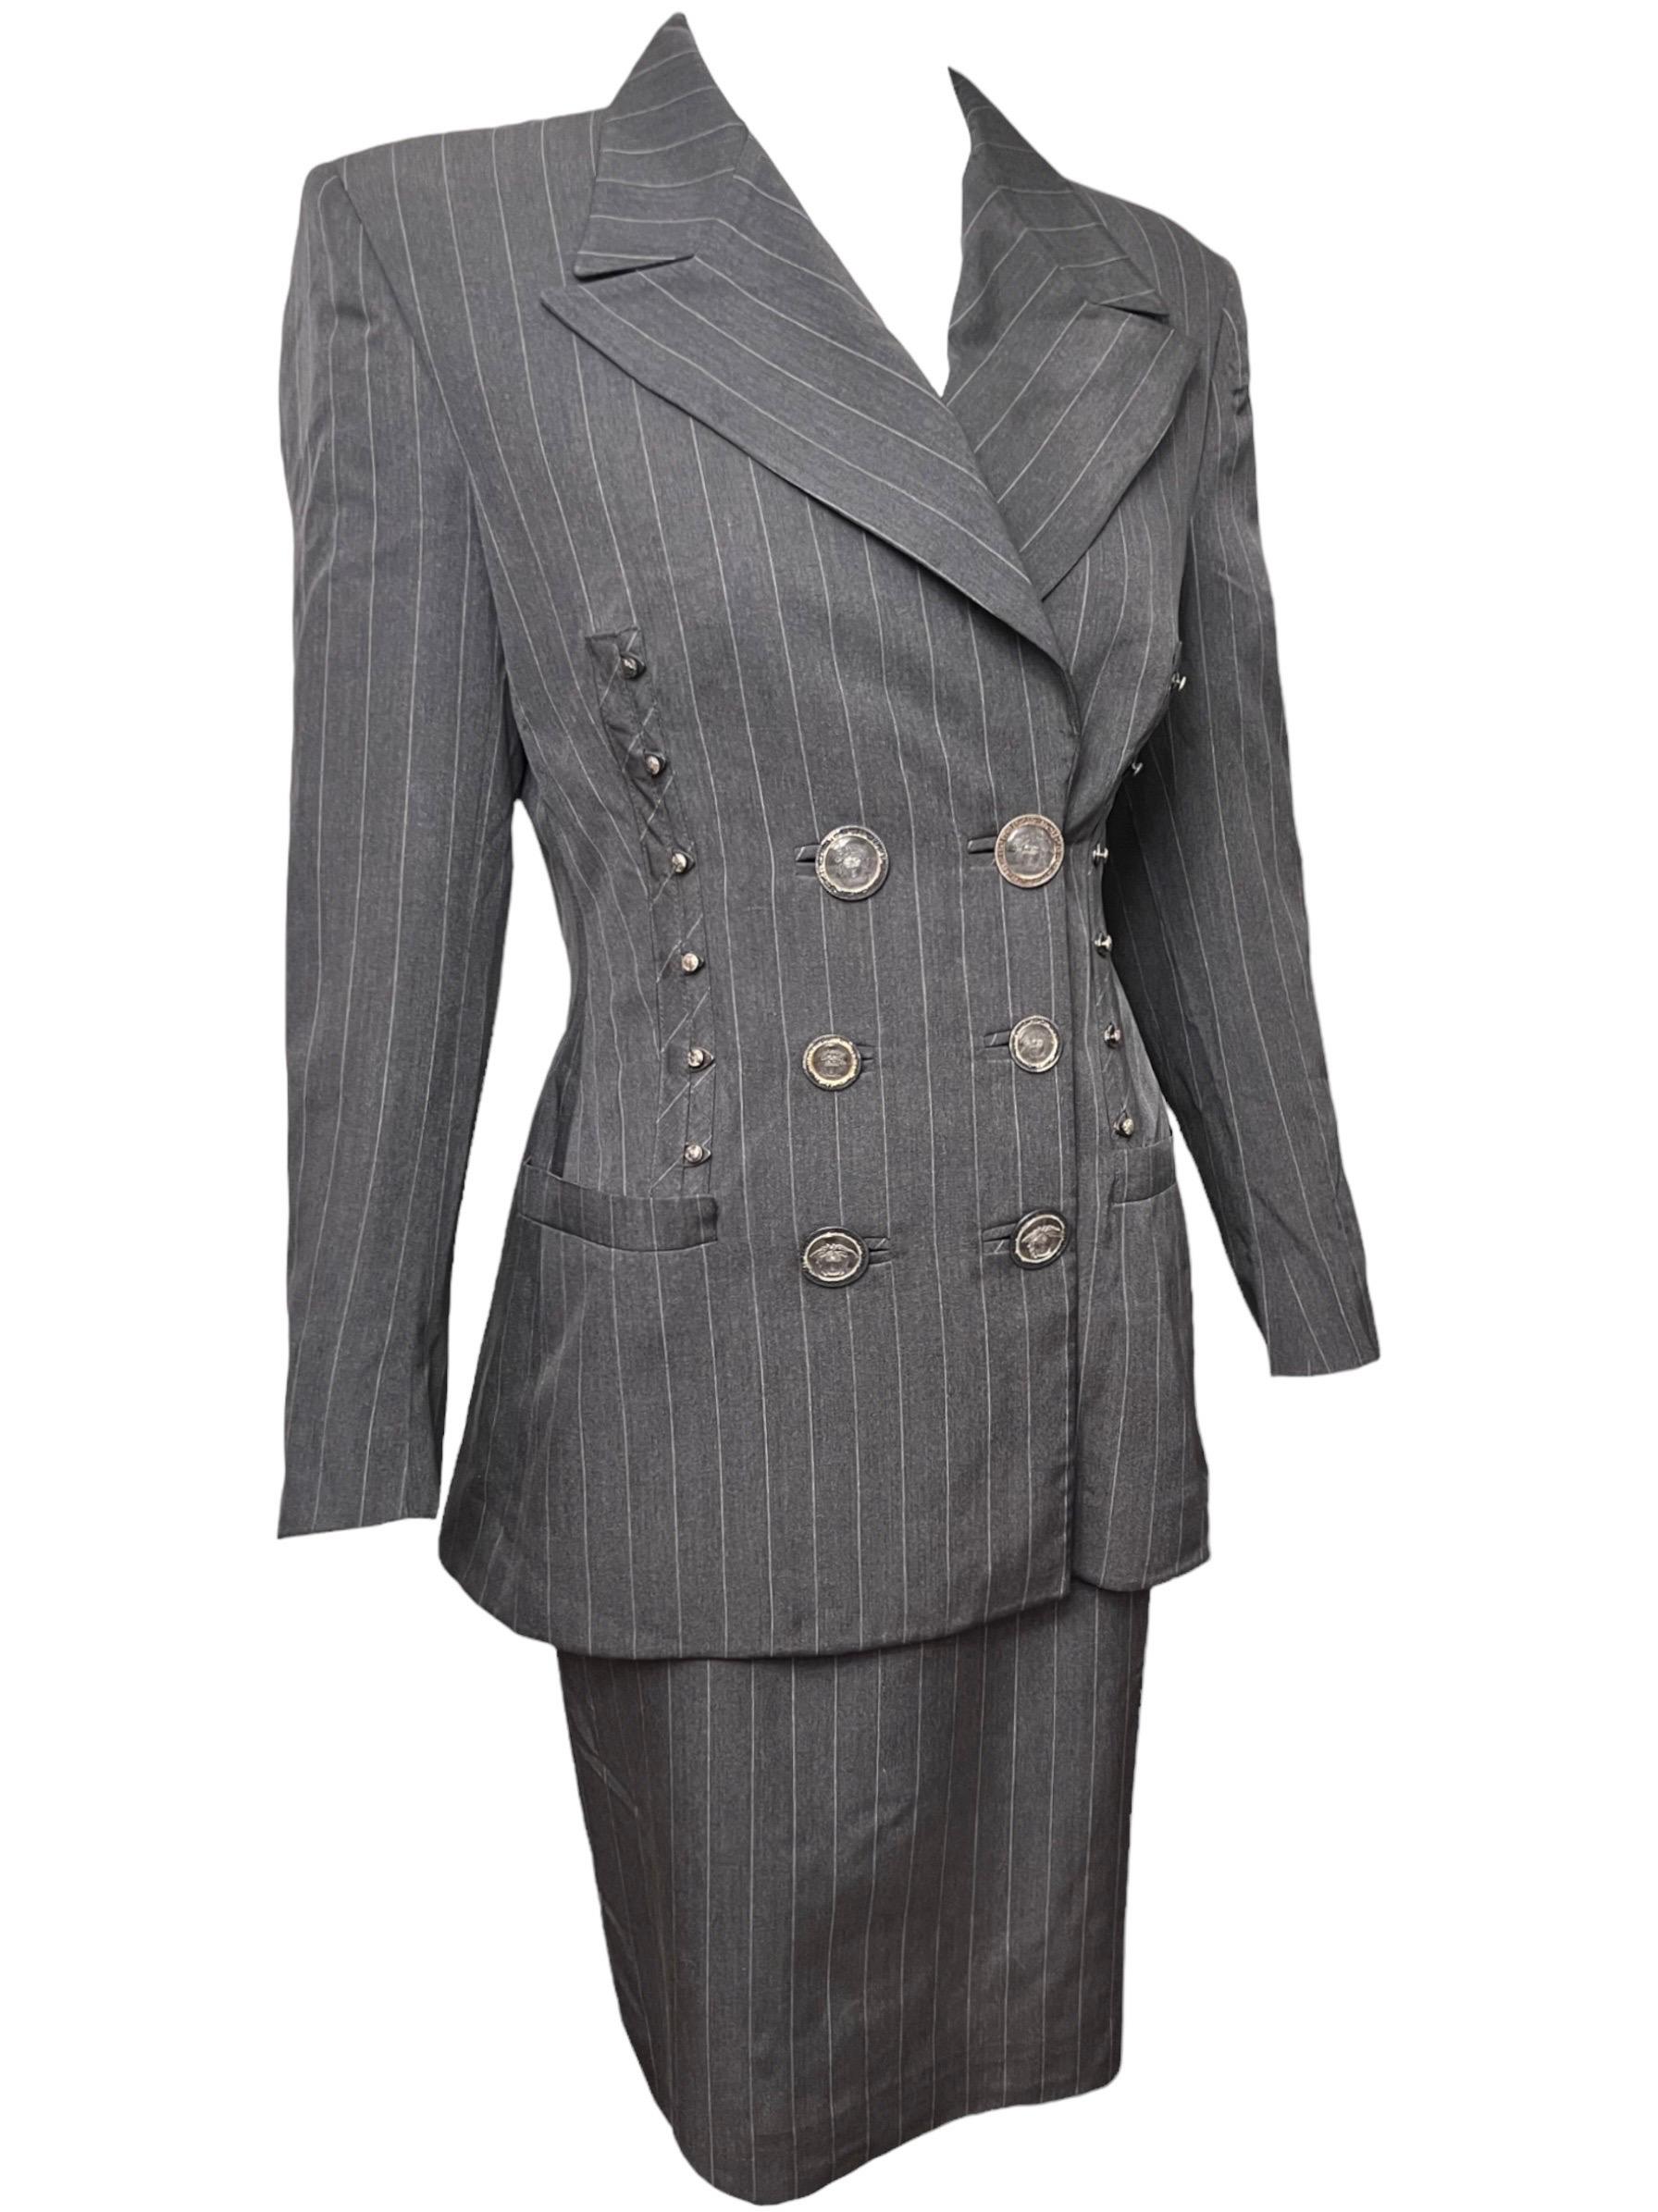 S/S 1995 Gianni Versace Runway Gray Pinstripe Medusa Medallion Skirt Suit In Excellent Condition For Sale In Concord, NC